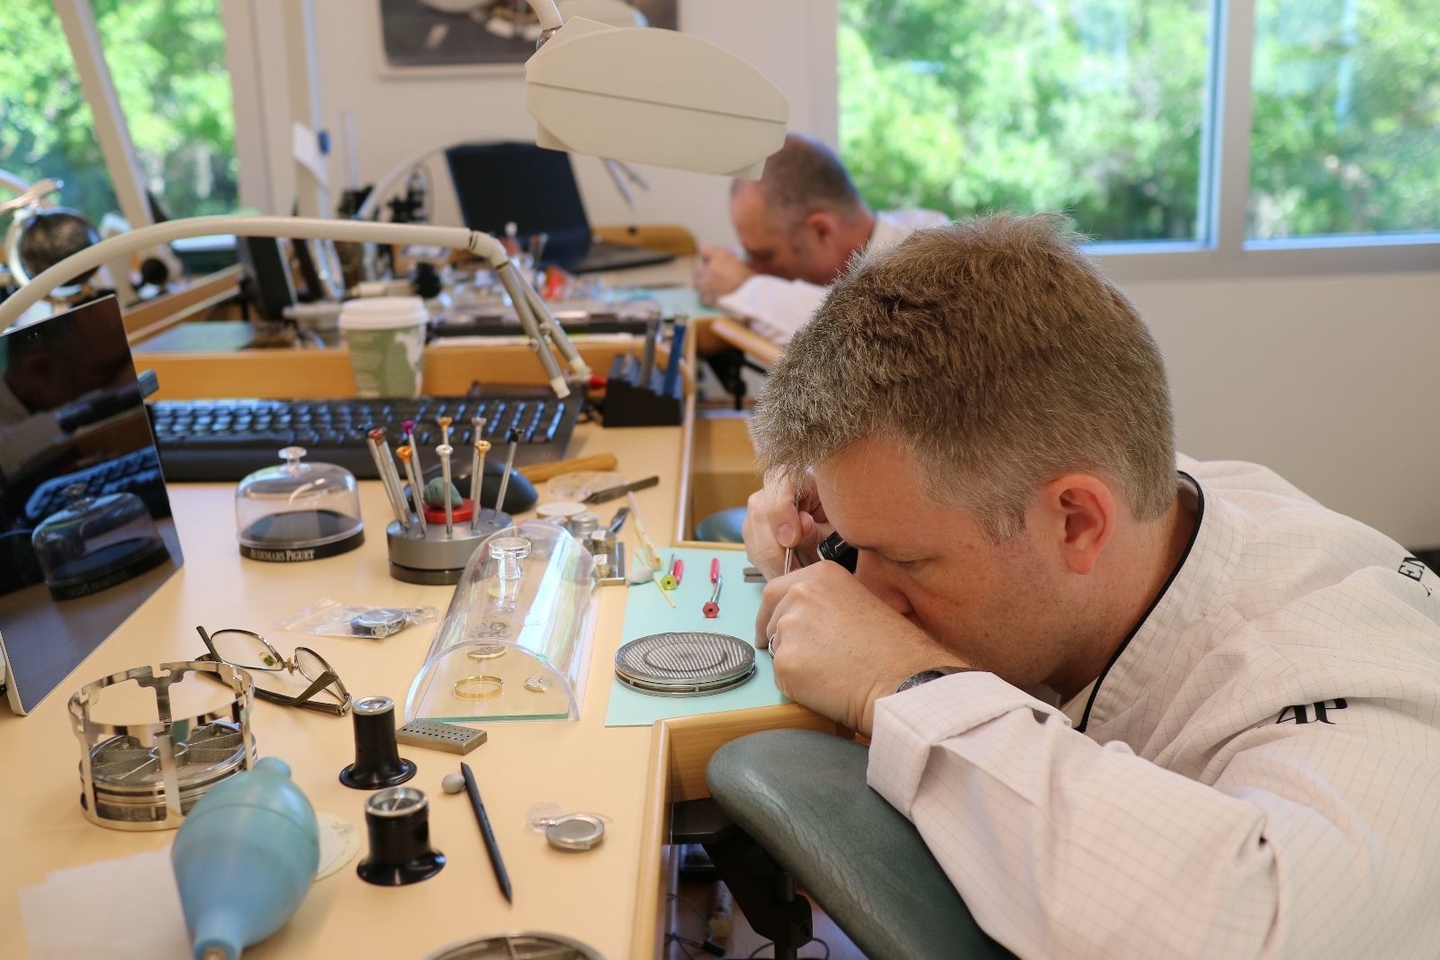 A step inside of Audemars Piguet’s US Service Center to see my Royal Oak receive a factory service